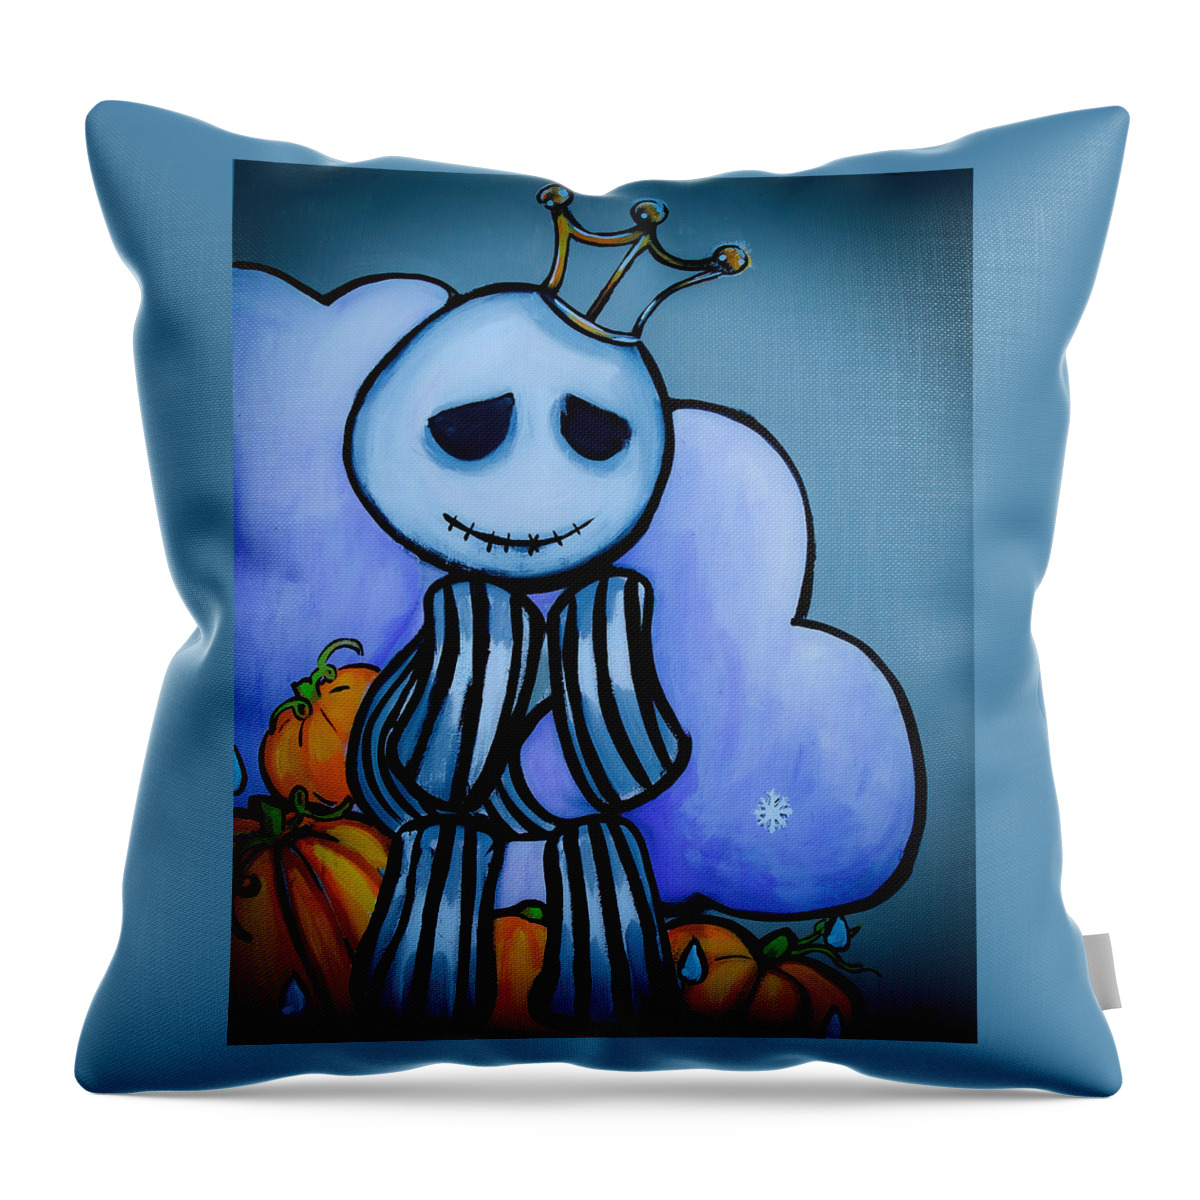 Nightmare Before Christmas Throw Pillow featuring the painting Pumpkin King's Lament by Marisela Mungia